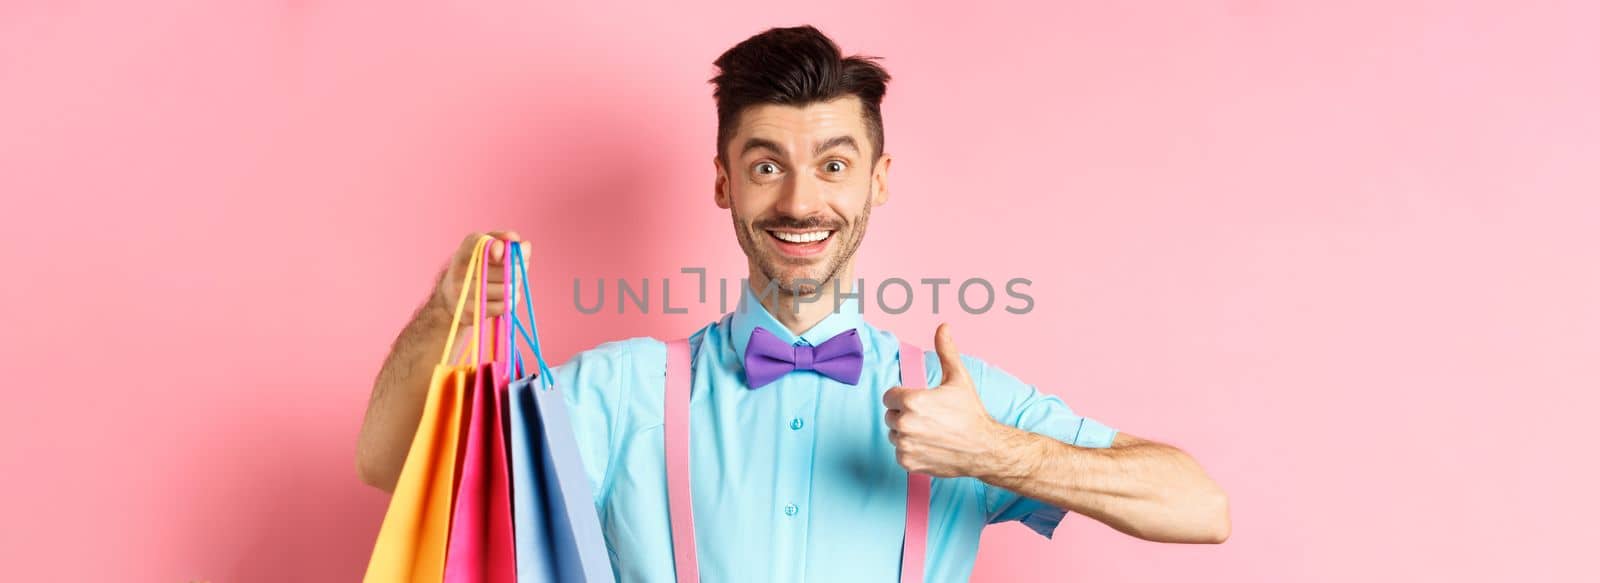 Happy male shopper showing thumbs up and shopping bags, recommending store, standing on pink background.